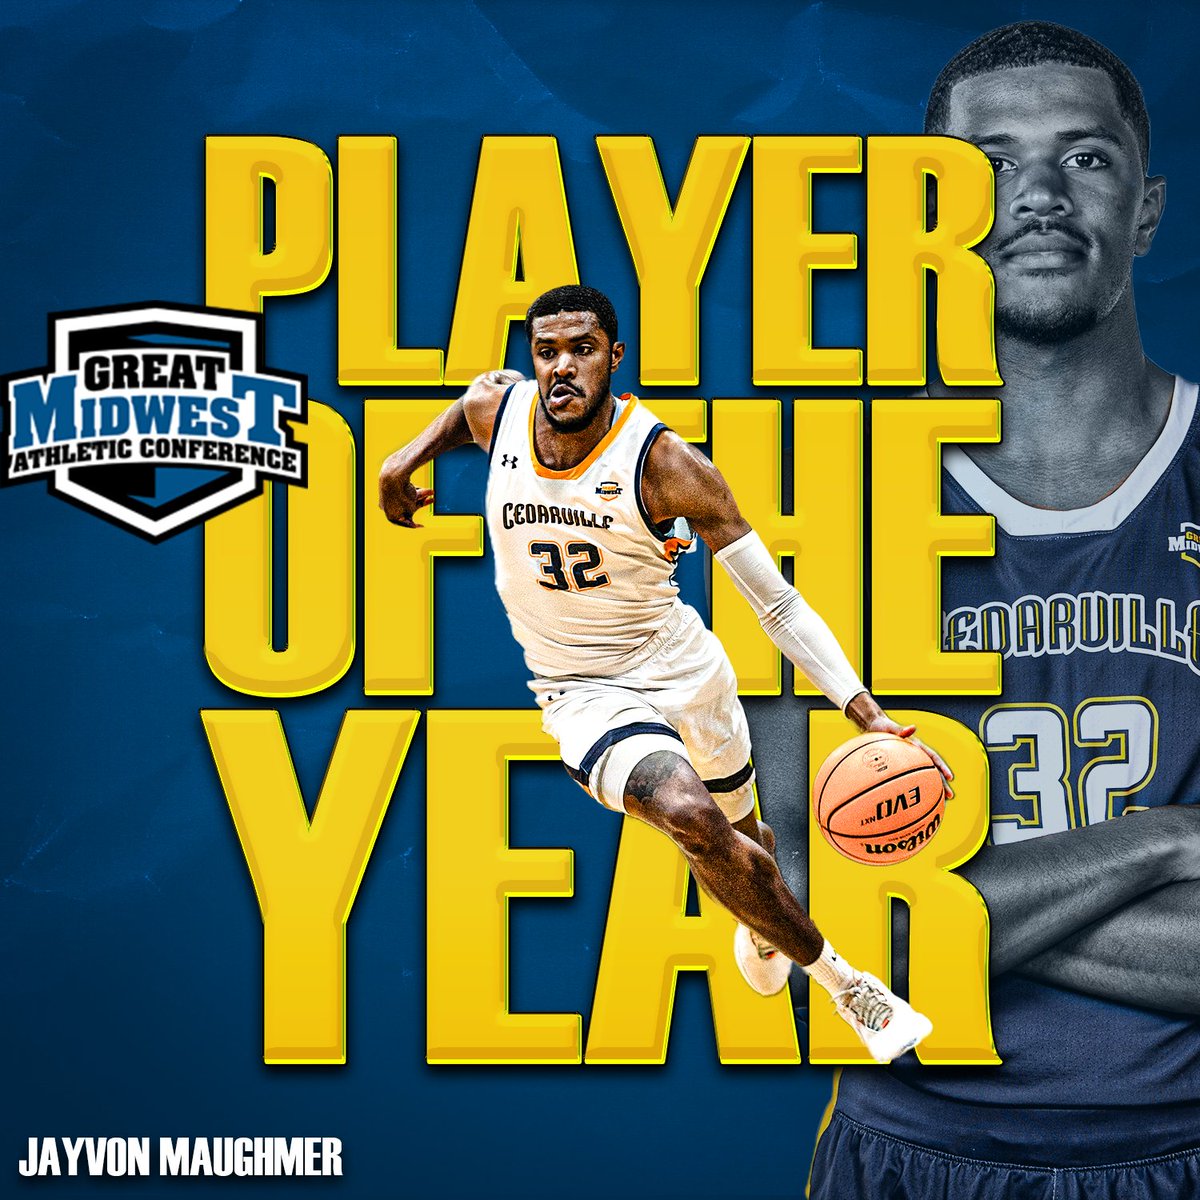 HUGE congrats to our guy @j_maughmer for earning @GreatMidwestAC Player of the Year! Tremendous season for a tremendous person and player! #1MoreYear 😉